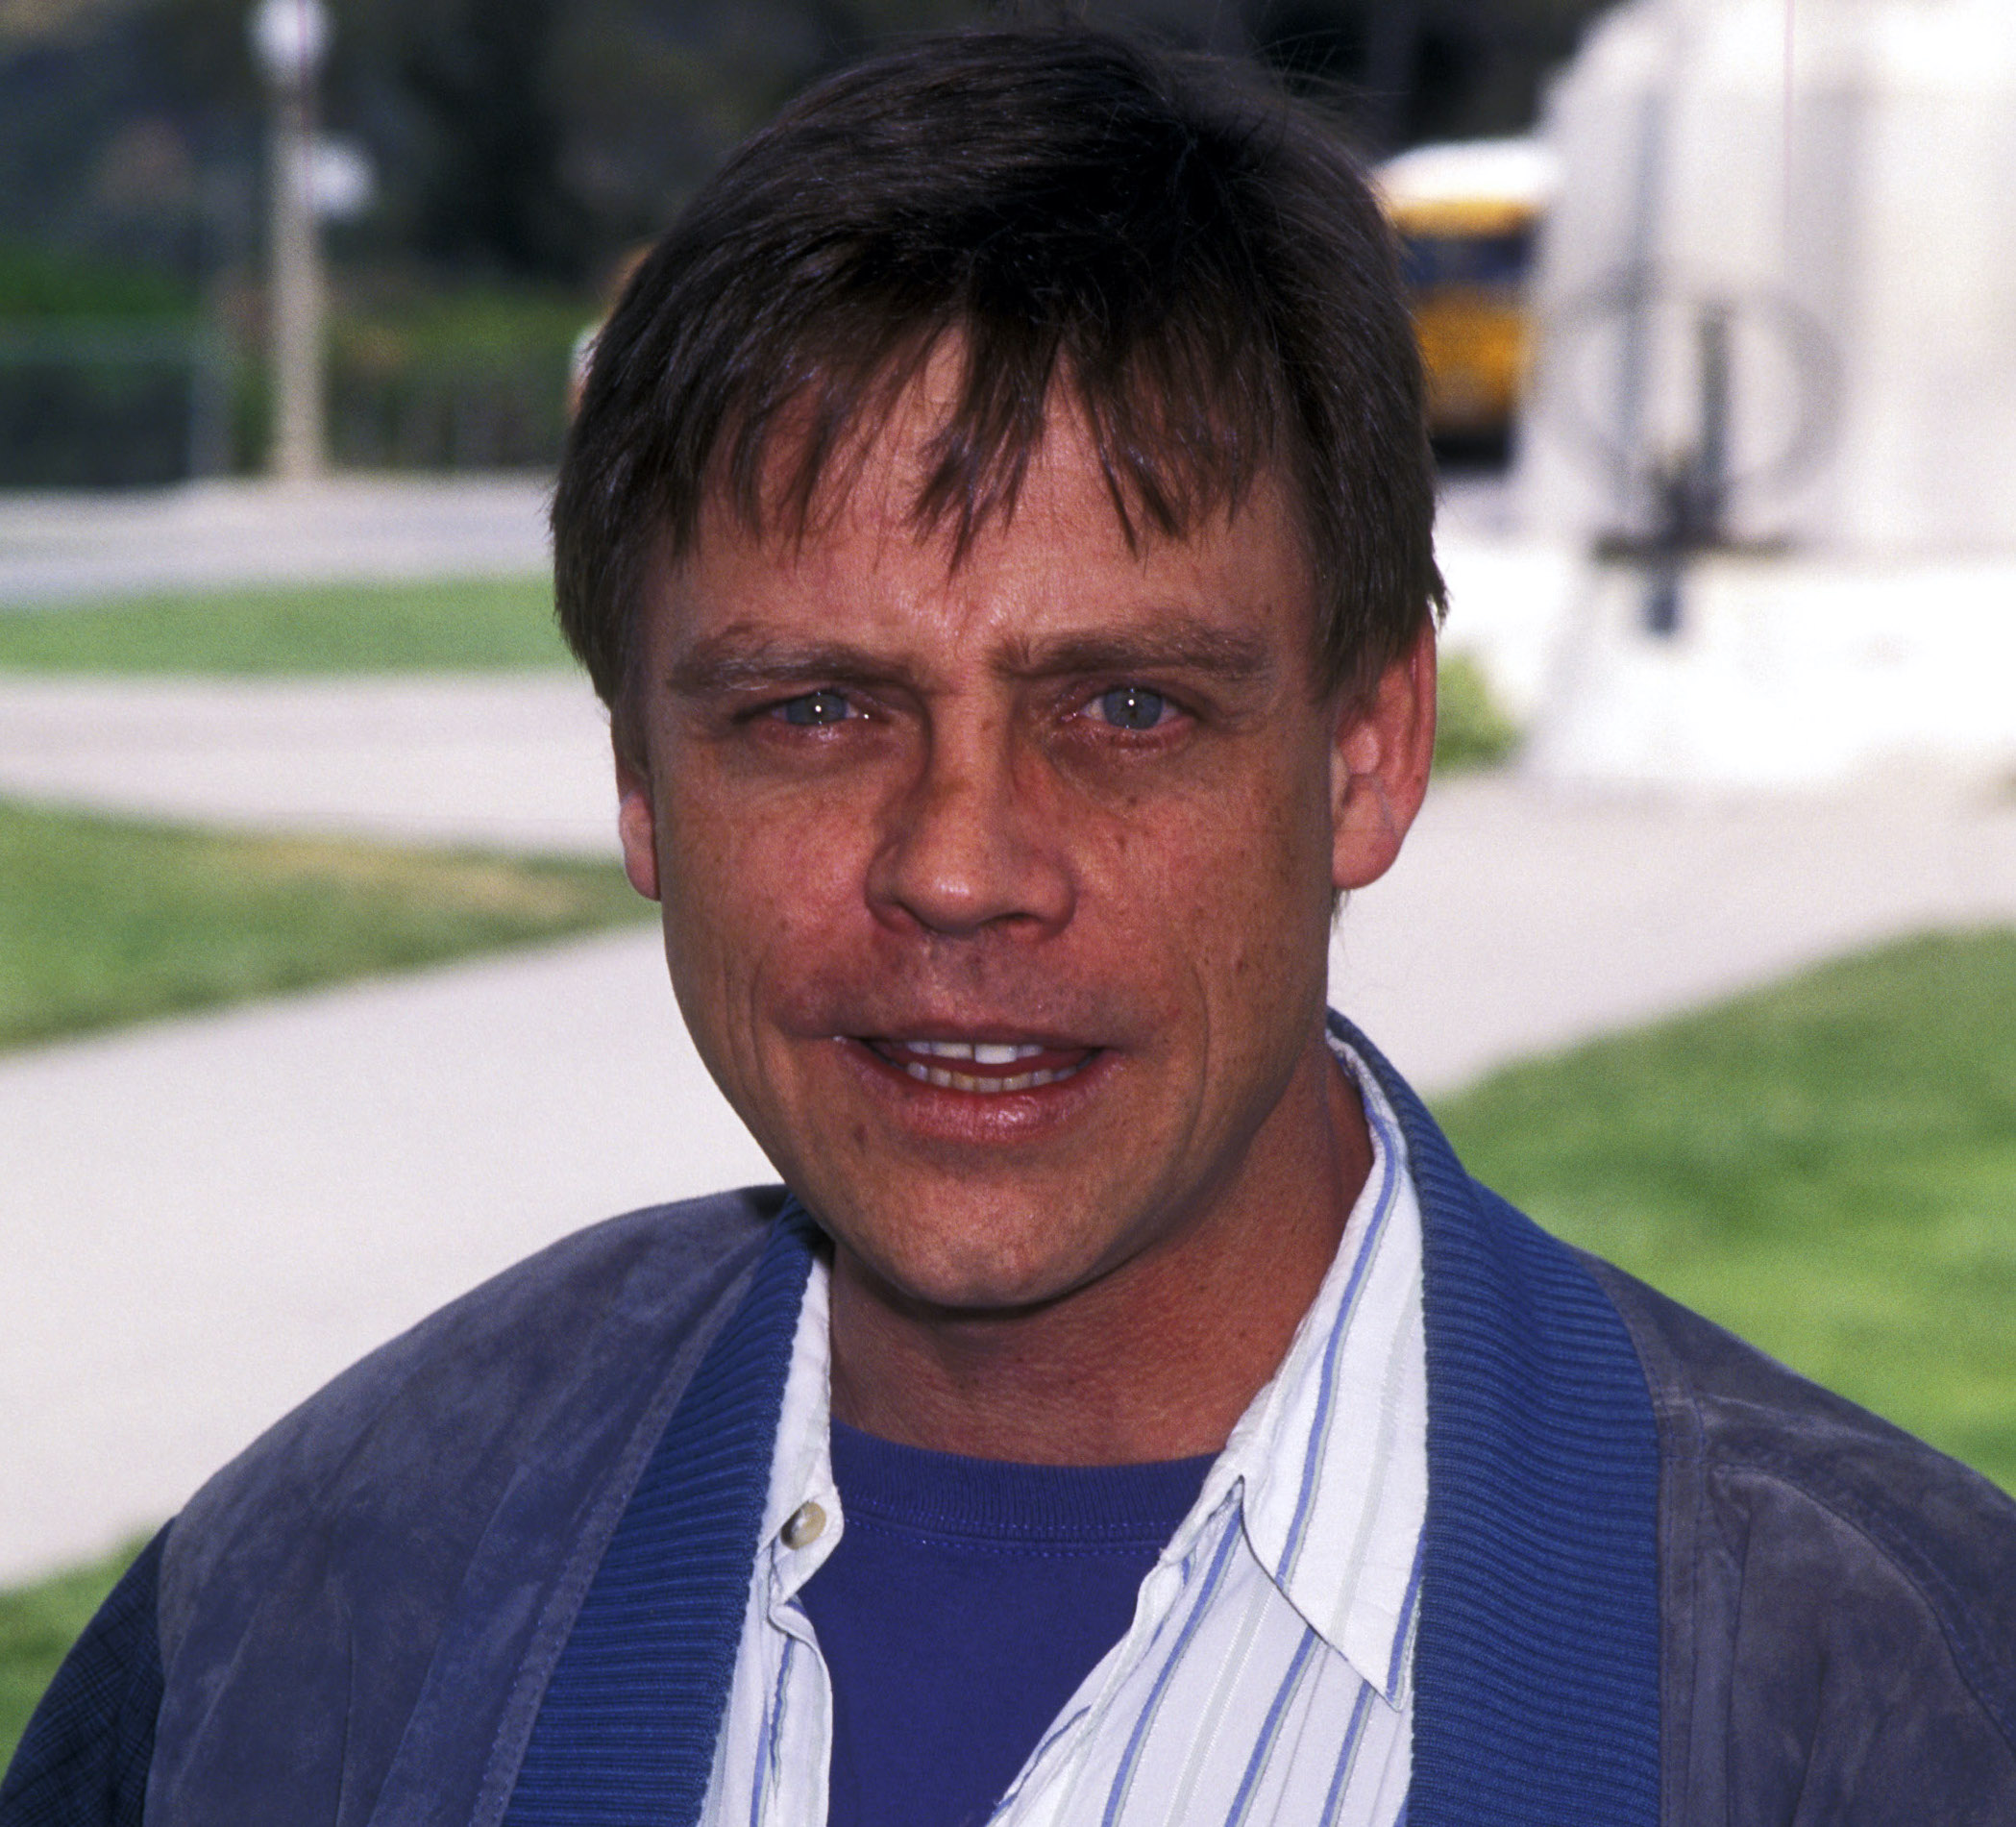 Mark Hamill interview: 'Everyone thinks they know me, wherever I